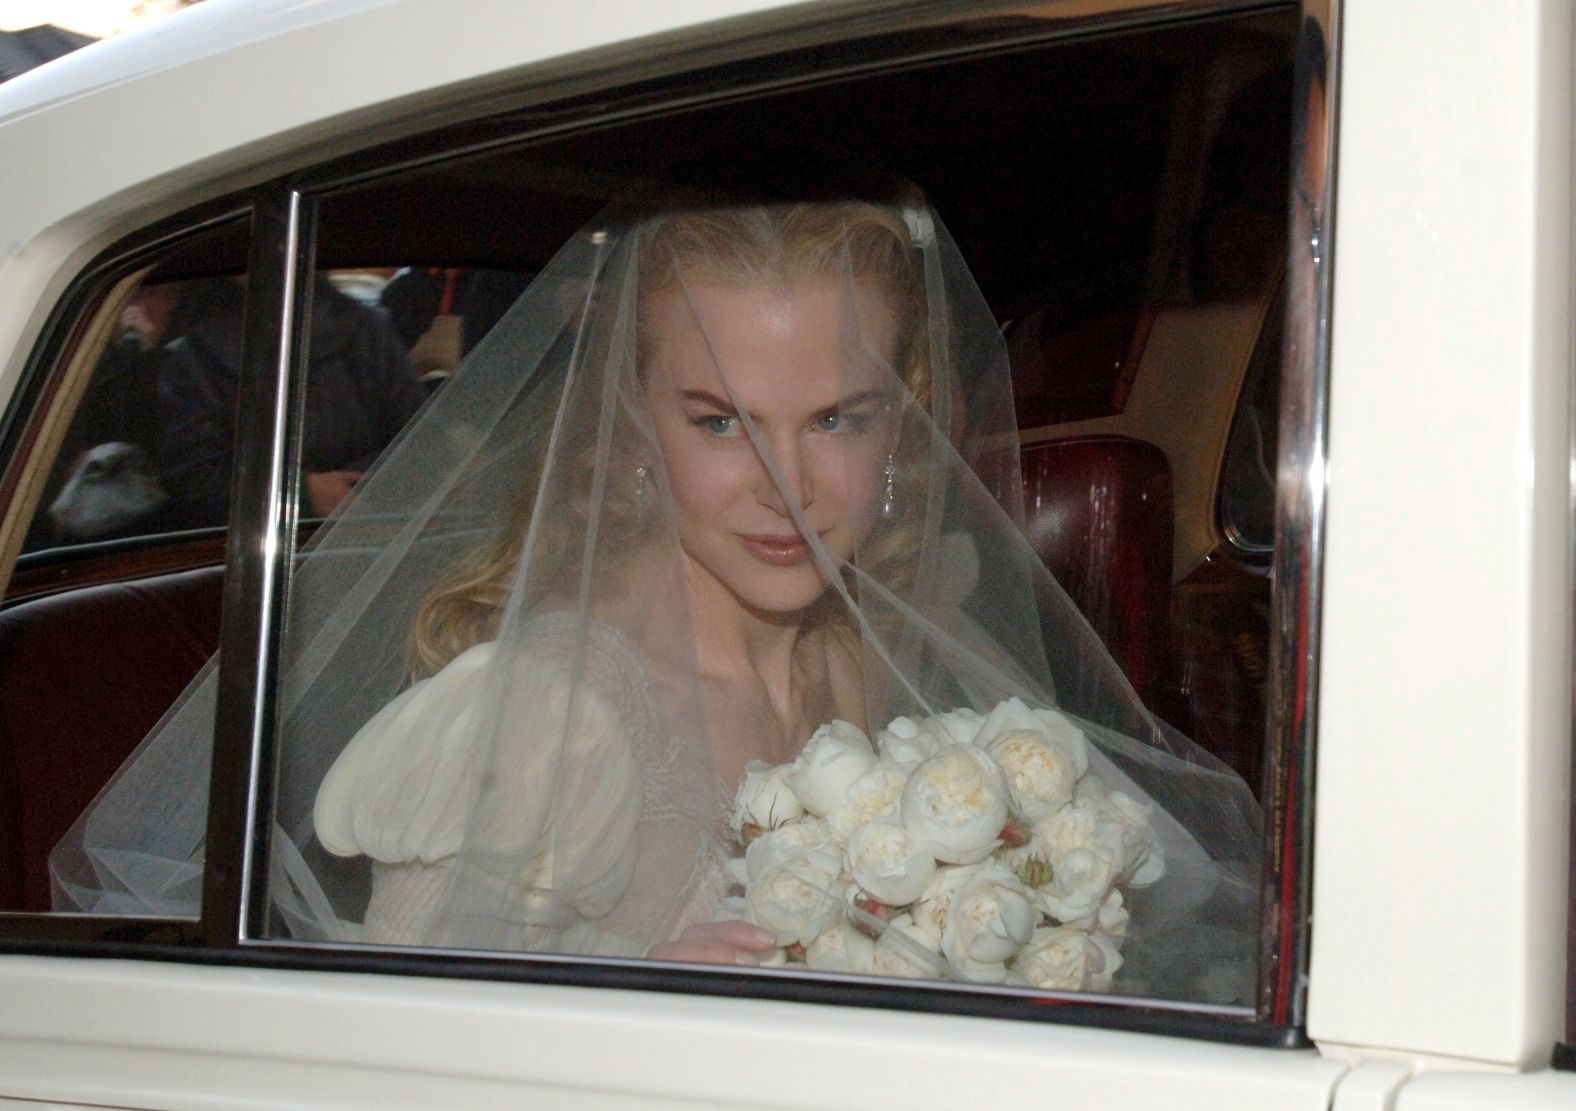 Kidman leaves her home in Sydney on her way to marry country singer Keith Urban in 2006.